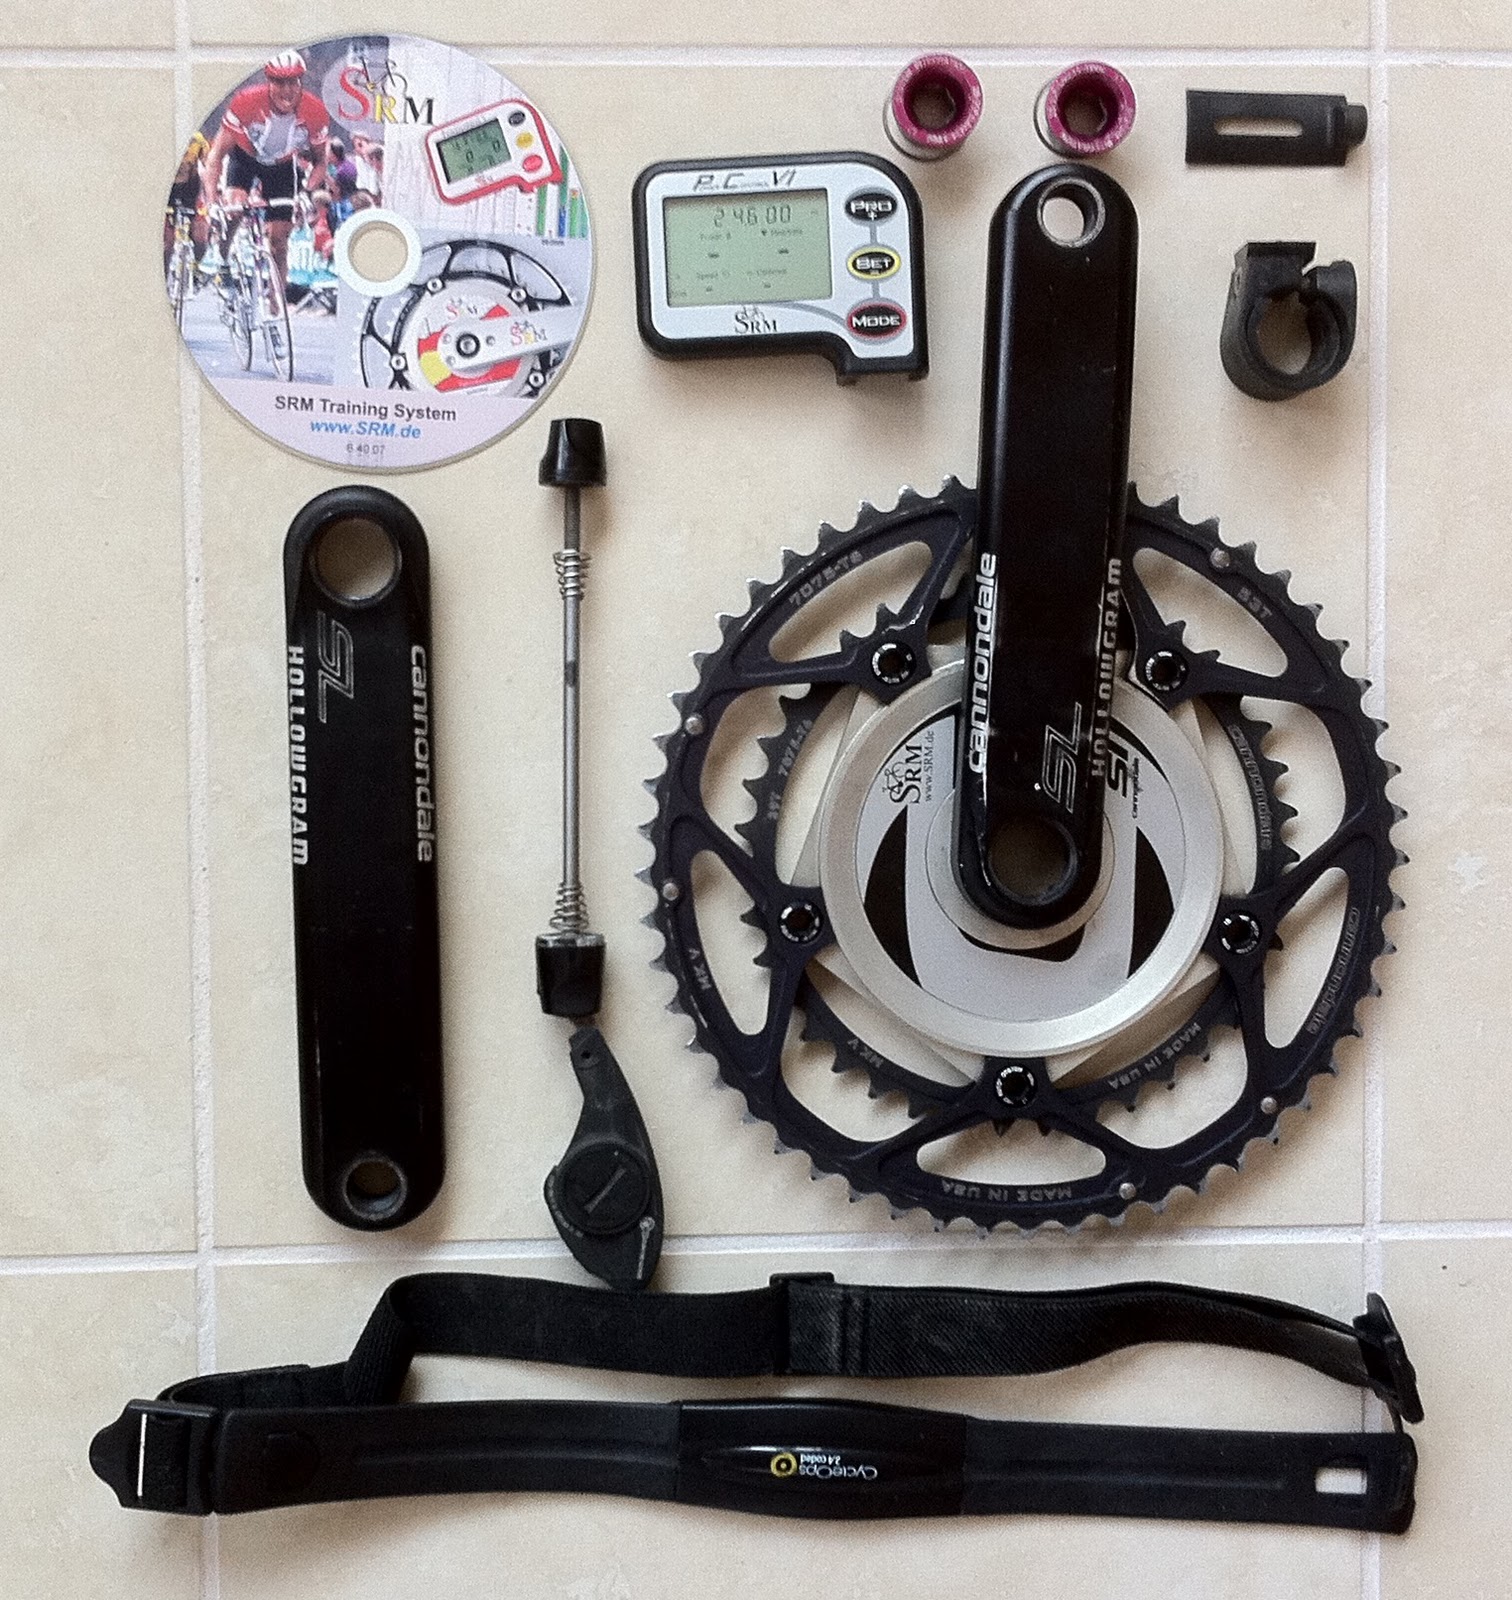 My World From a Bicycle: SRM Power Meter with accessories